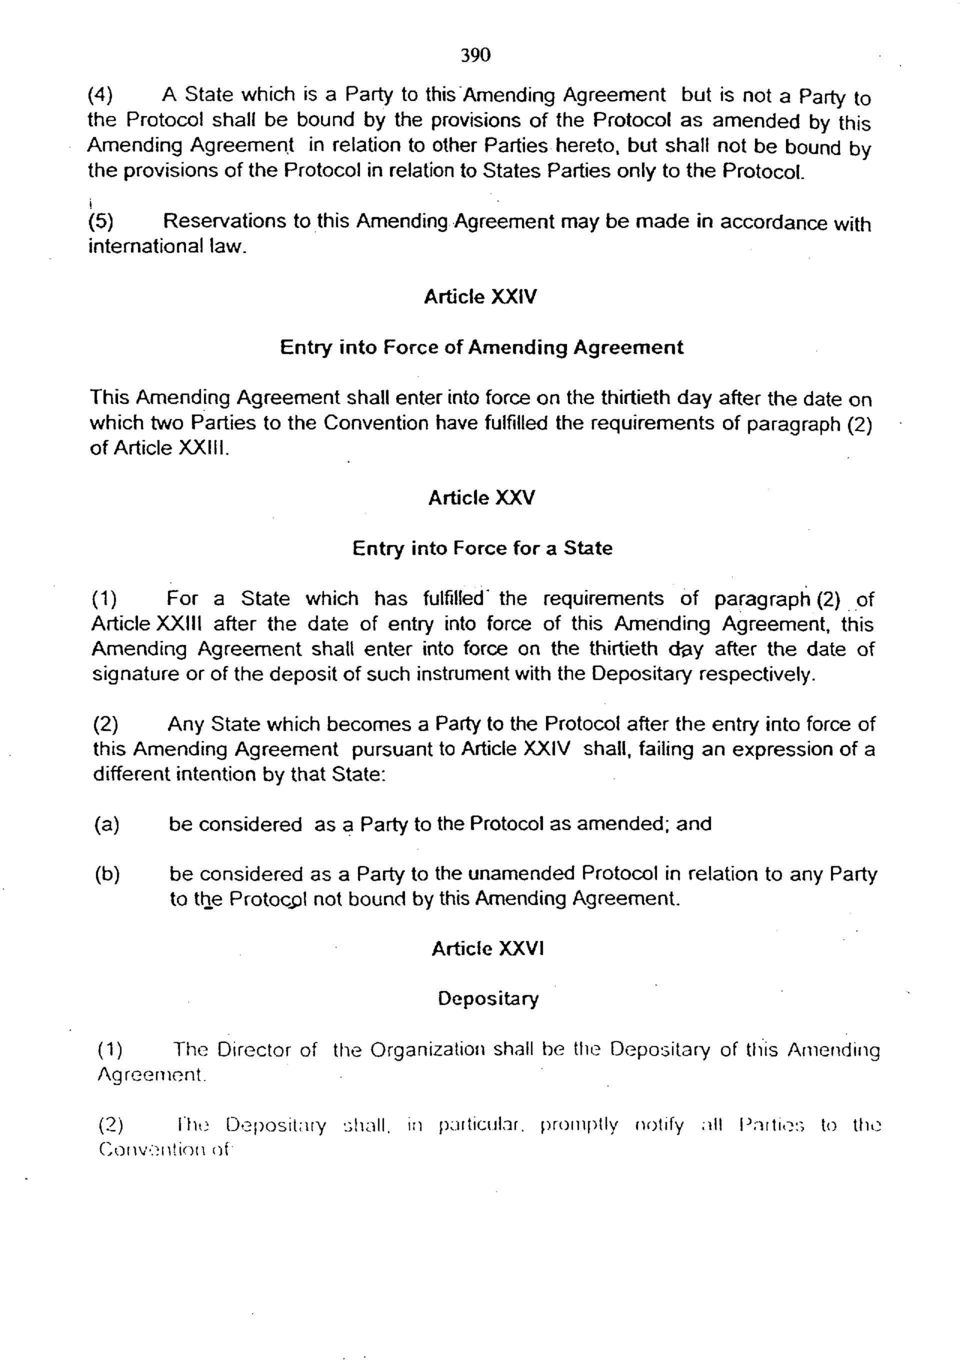 i (5) Reservations to this Amending Agreement may be made in accordance with international law.